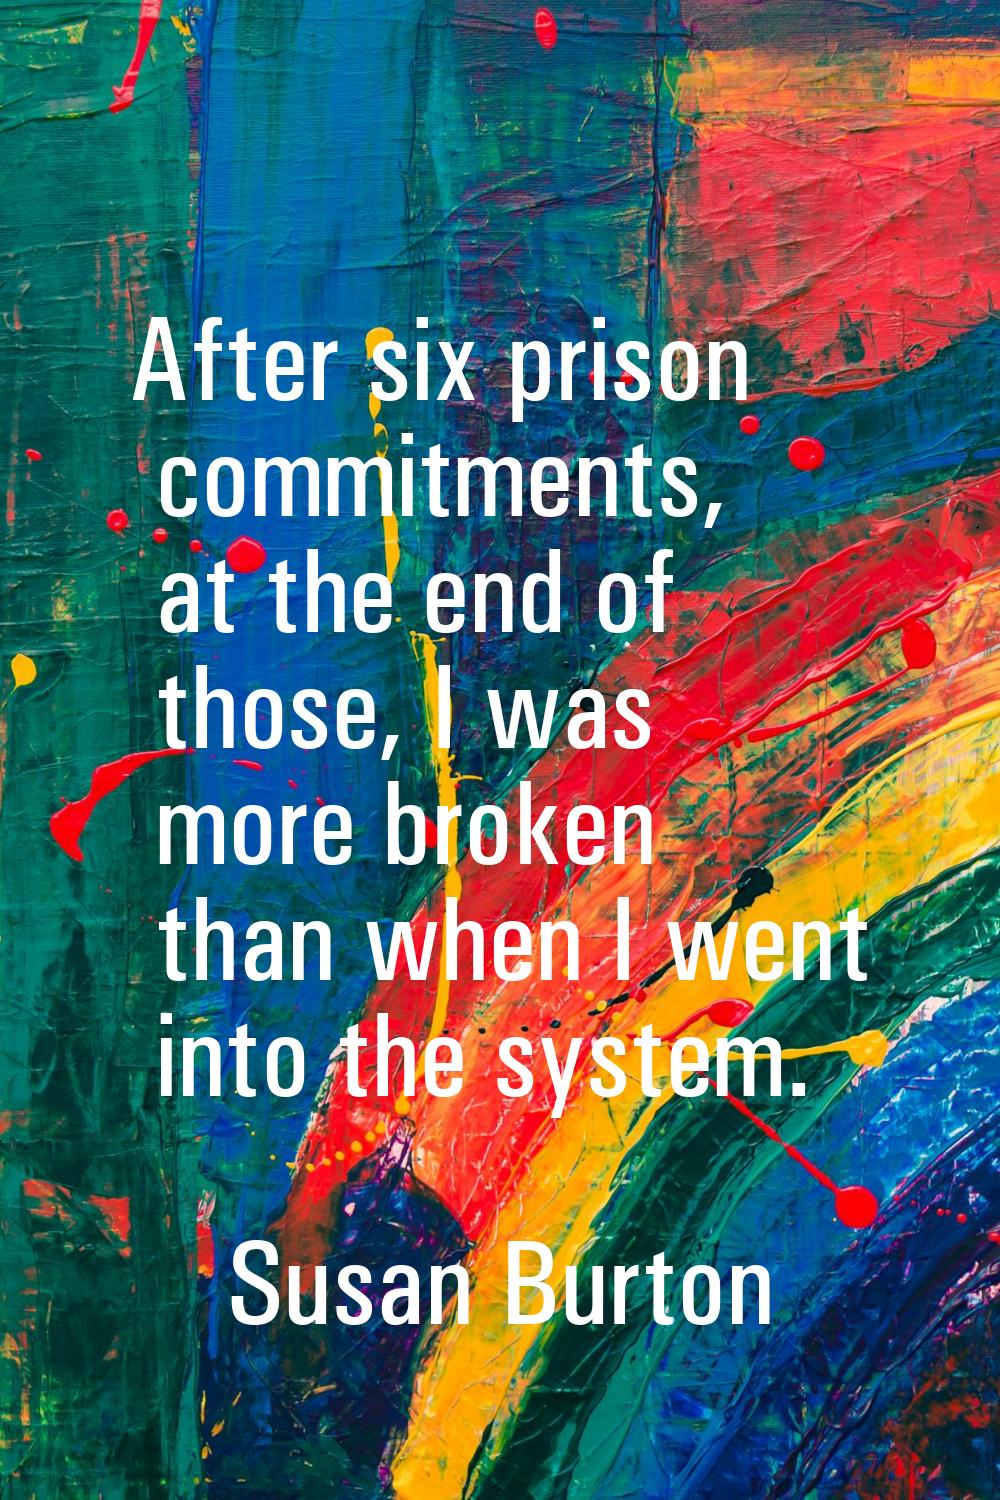 After six prison commitments, at the end of those, I was more broken than when I went into the syst